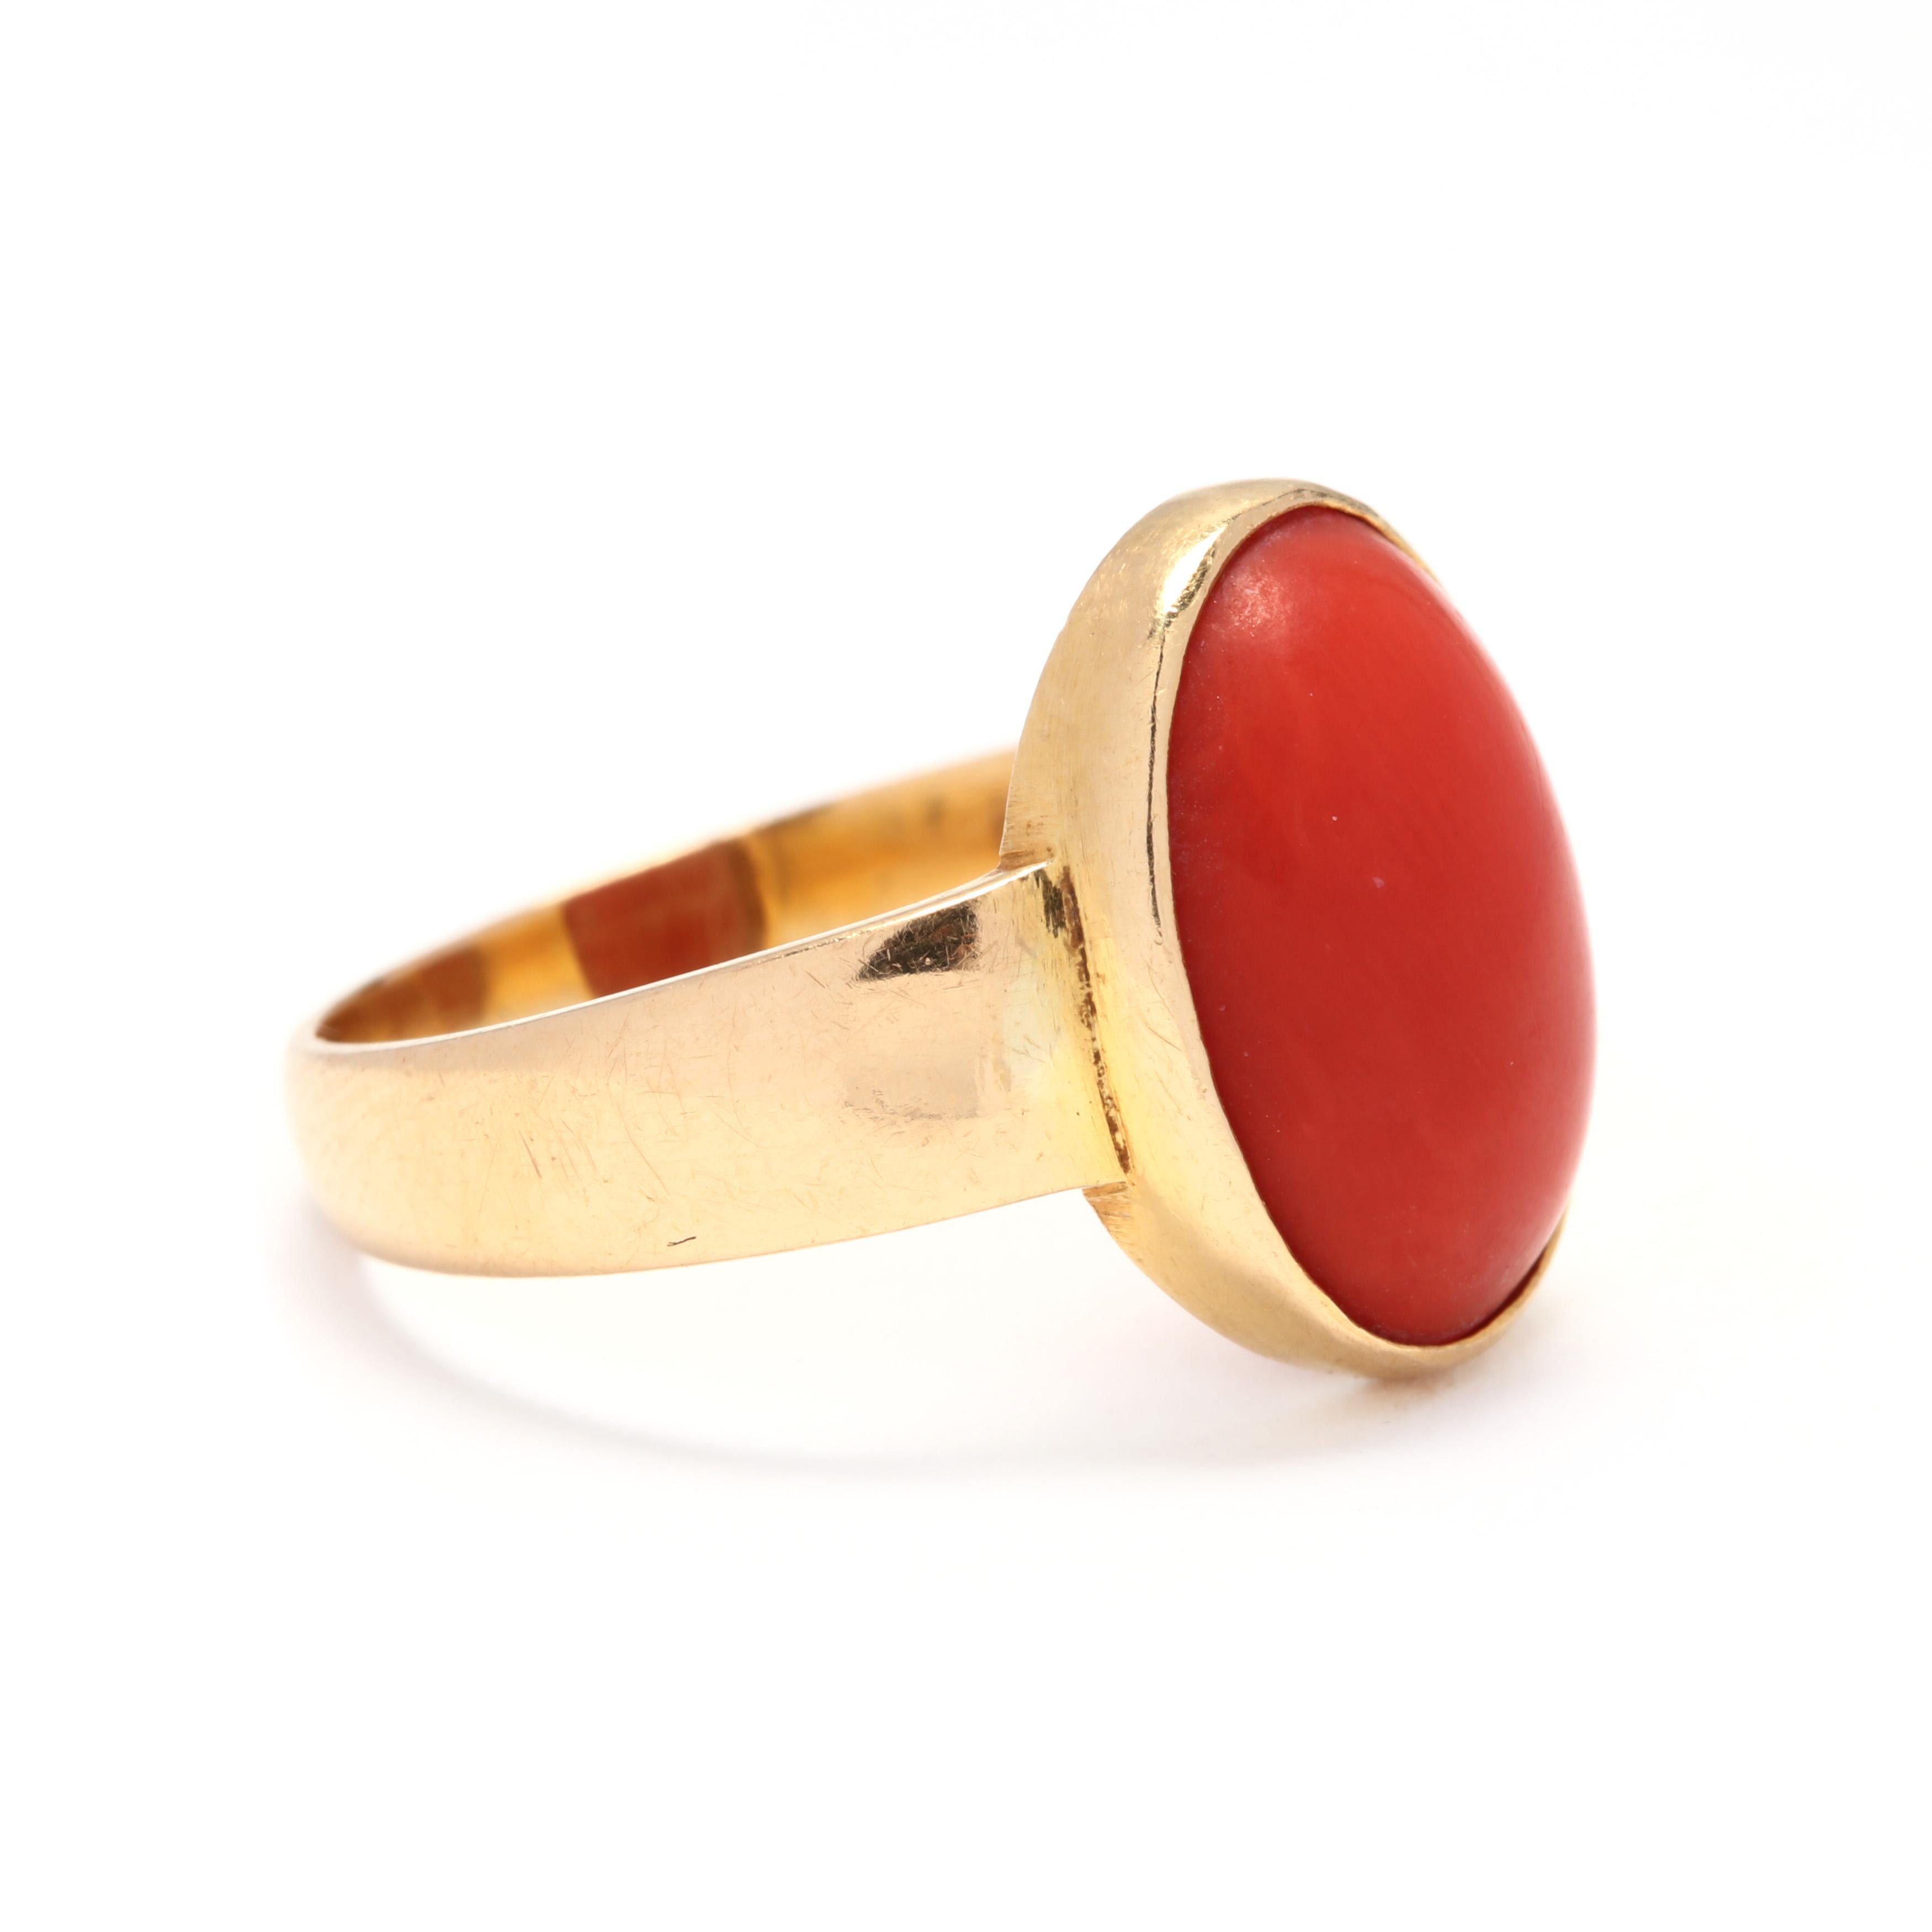 An 18 karat yellow gold and bezel set coral solitaire ring. An oval, cabochon coral center stone, bezel set on a wide slightly tapered shank.

Stone:
- coral, 1 stone
- oval, cabochon
- 13.5 x 9.75 x 4.4 mm

Ring Size 6.75

Width: 14.8 mm

2.96